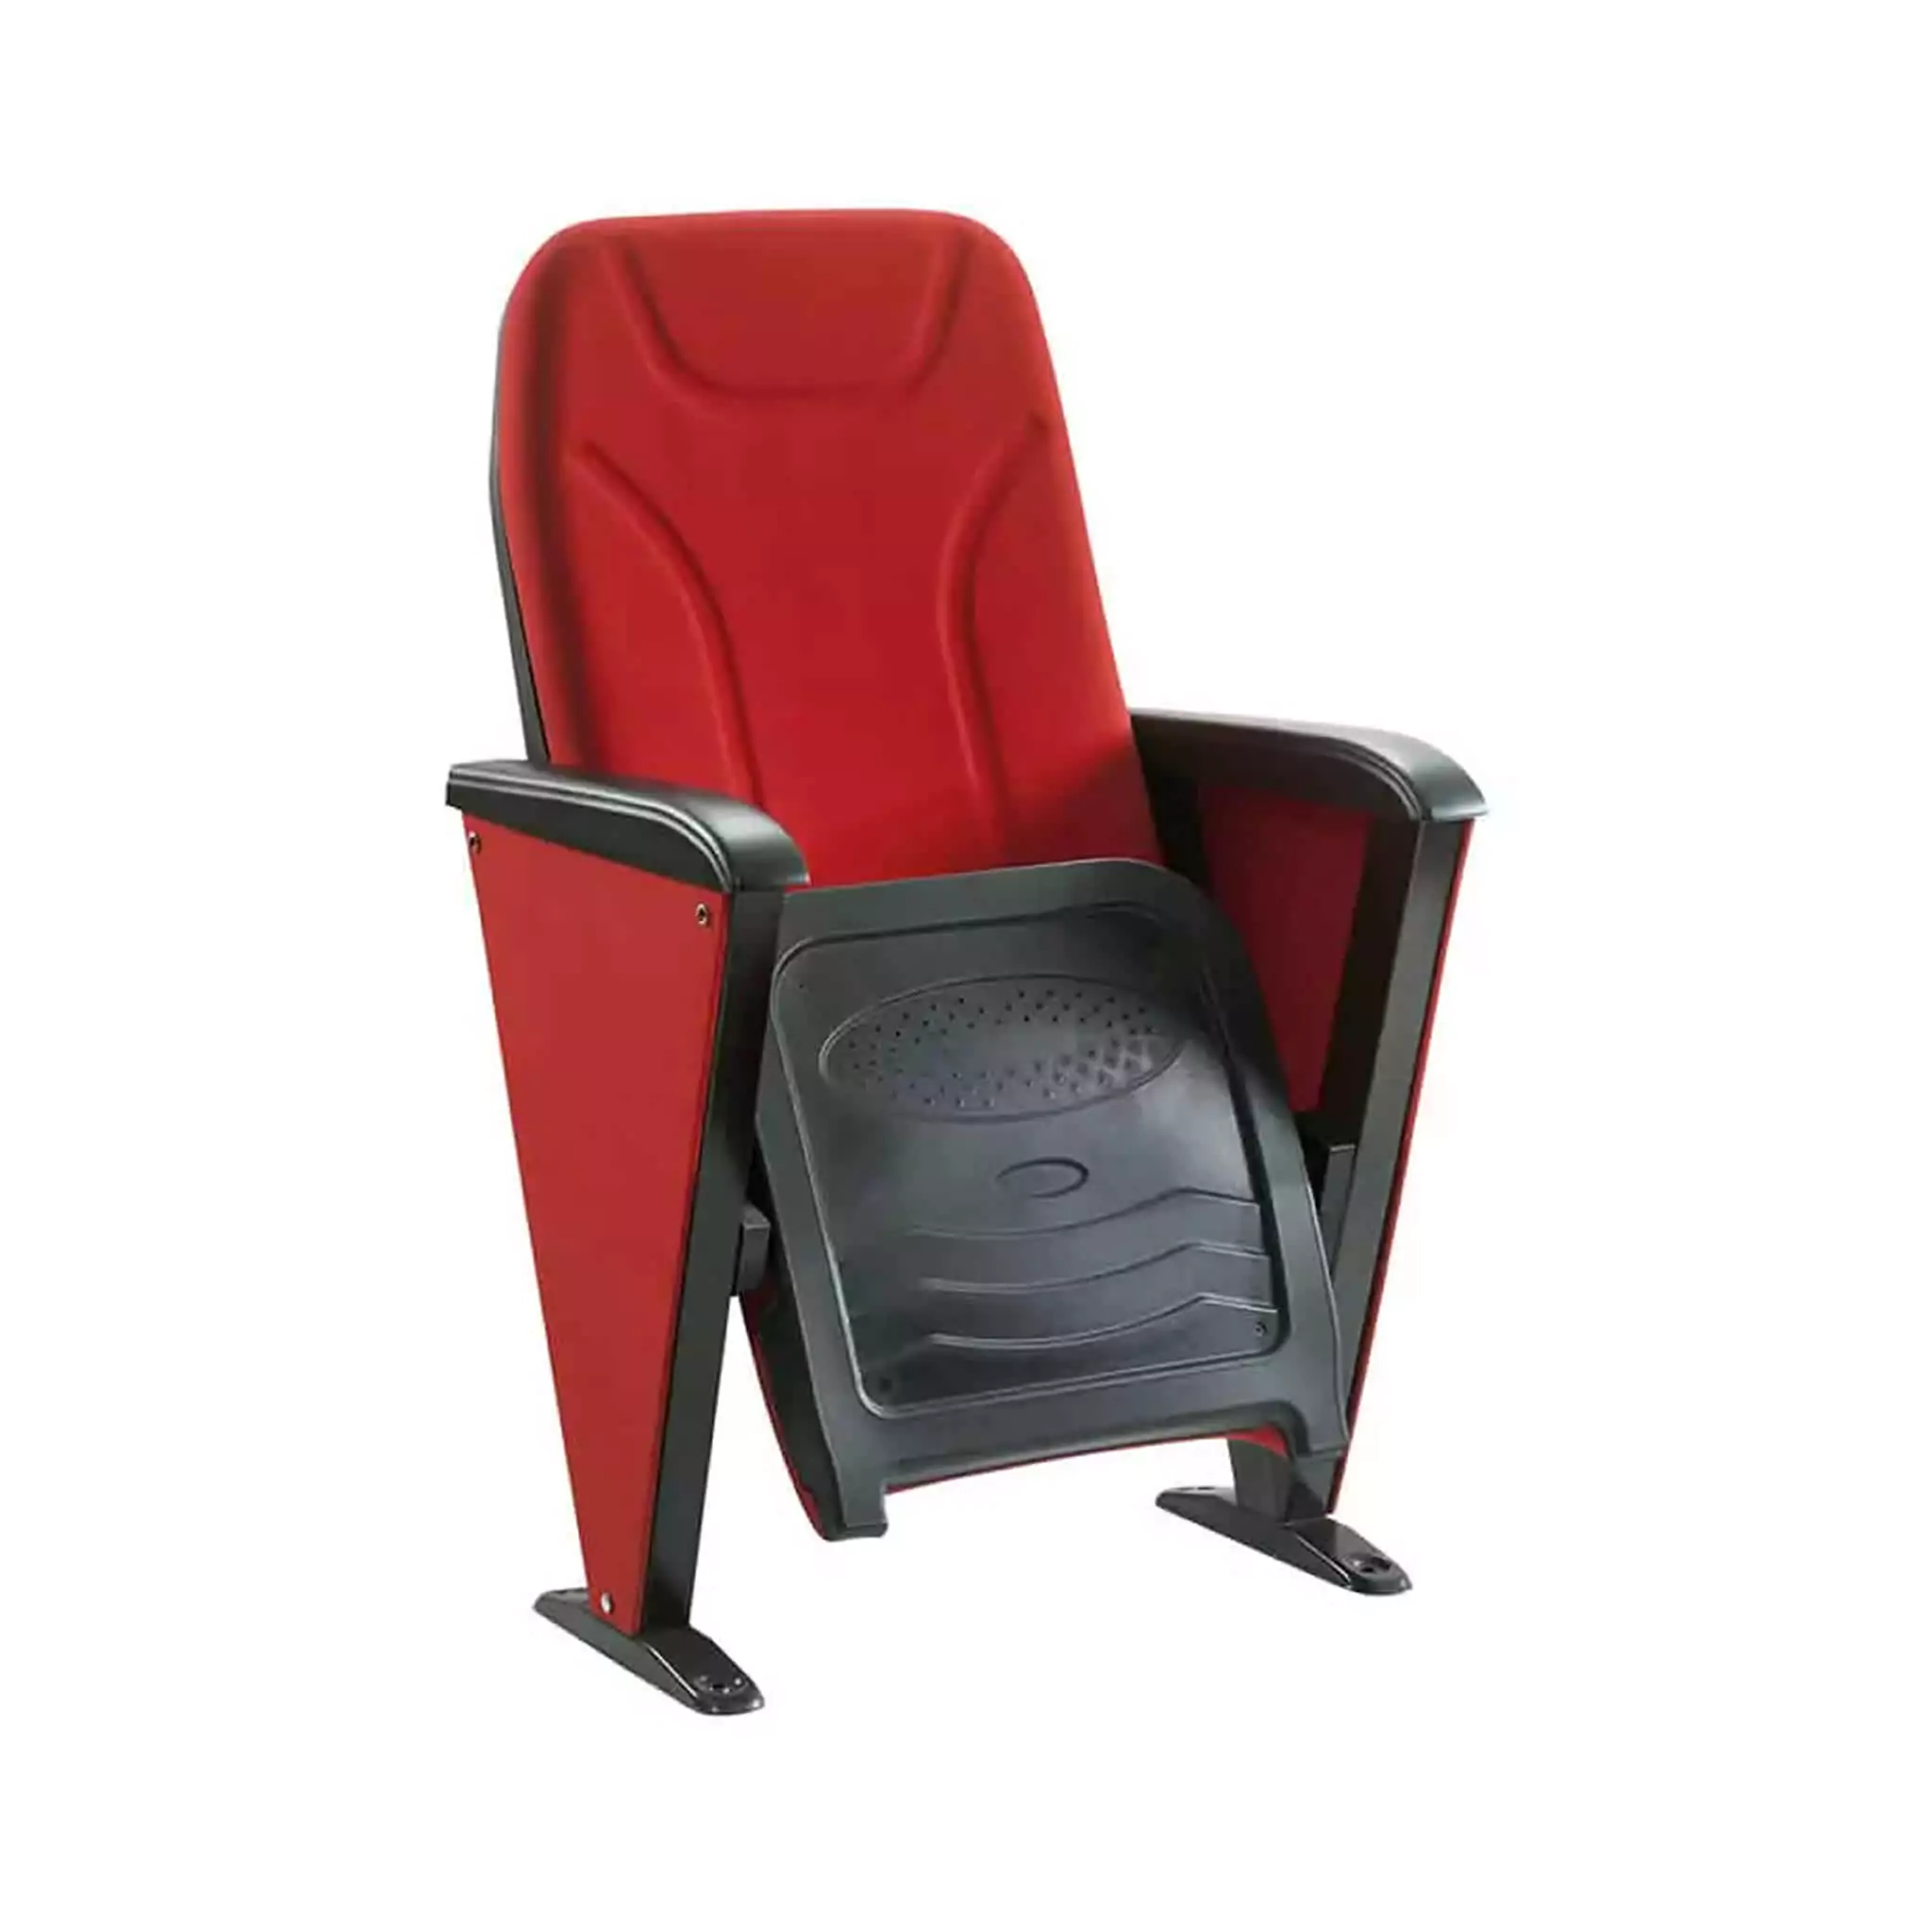 Simko Seating Products Conference Seat Zirkon 02